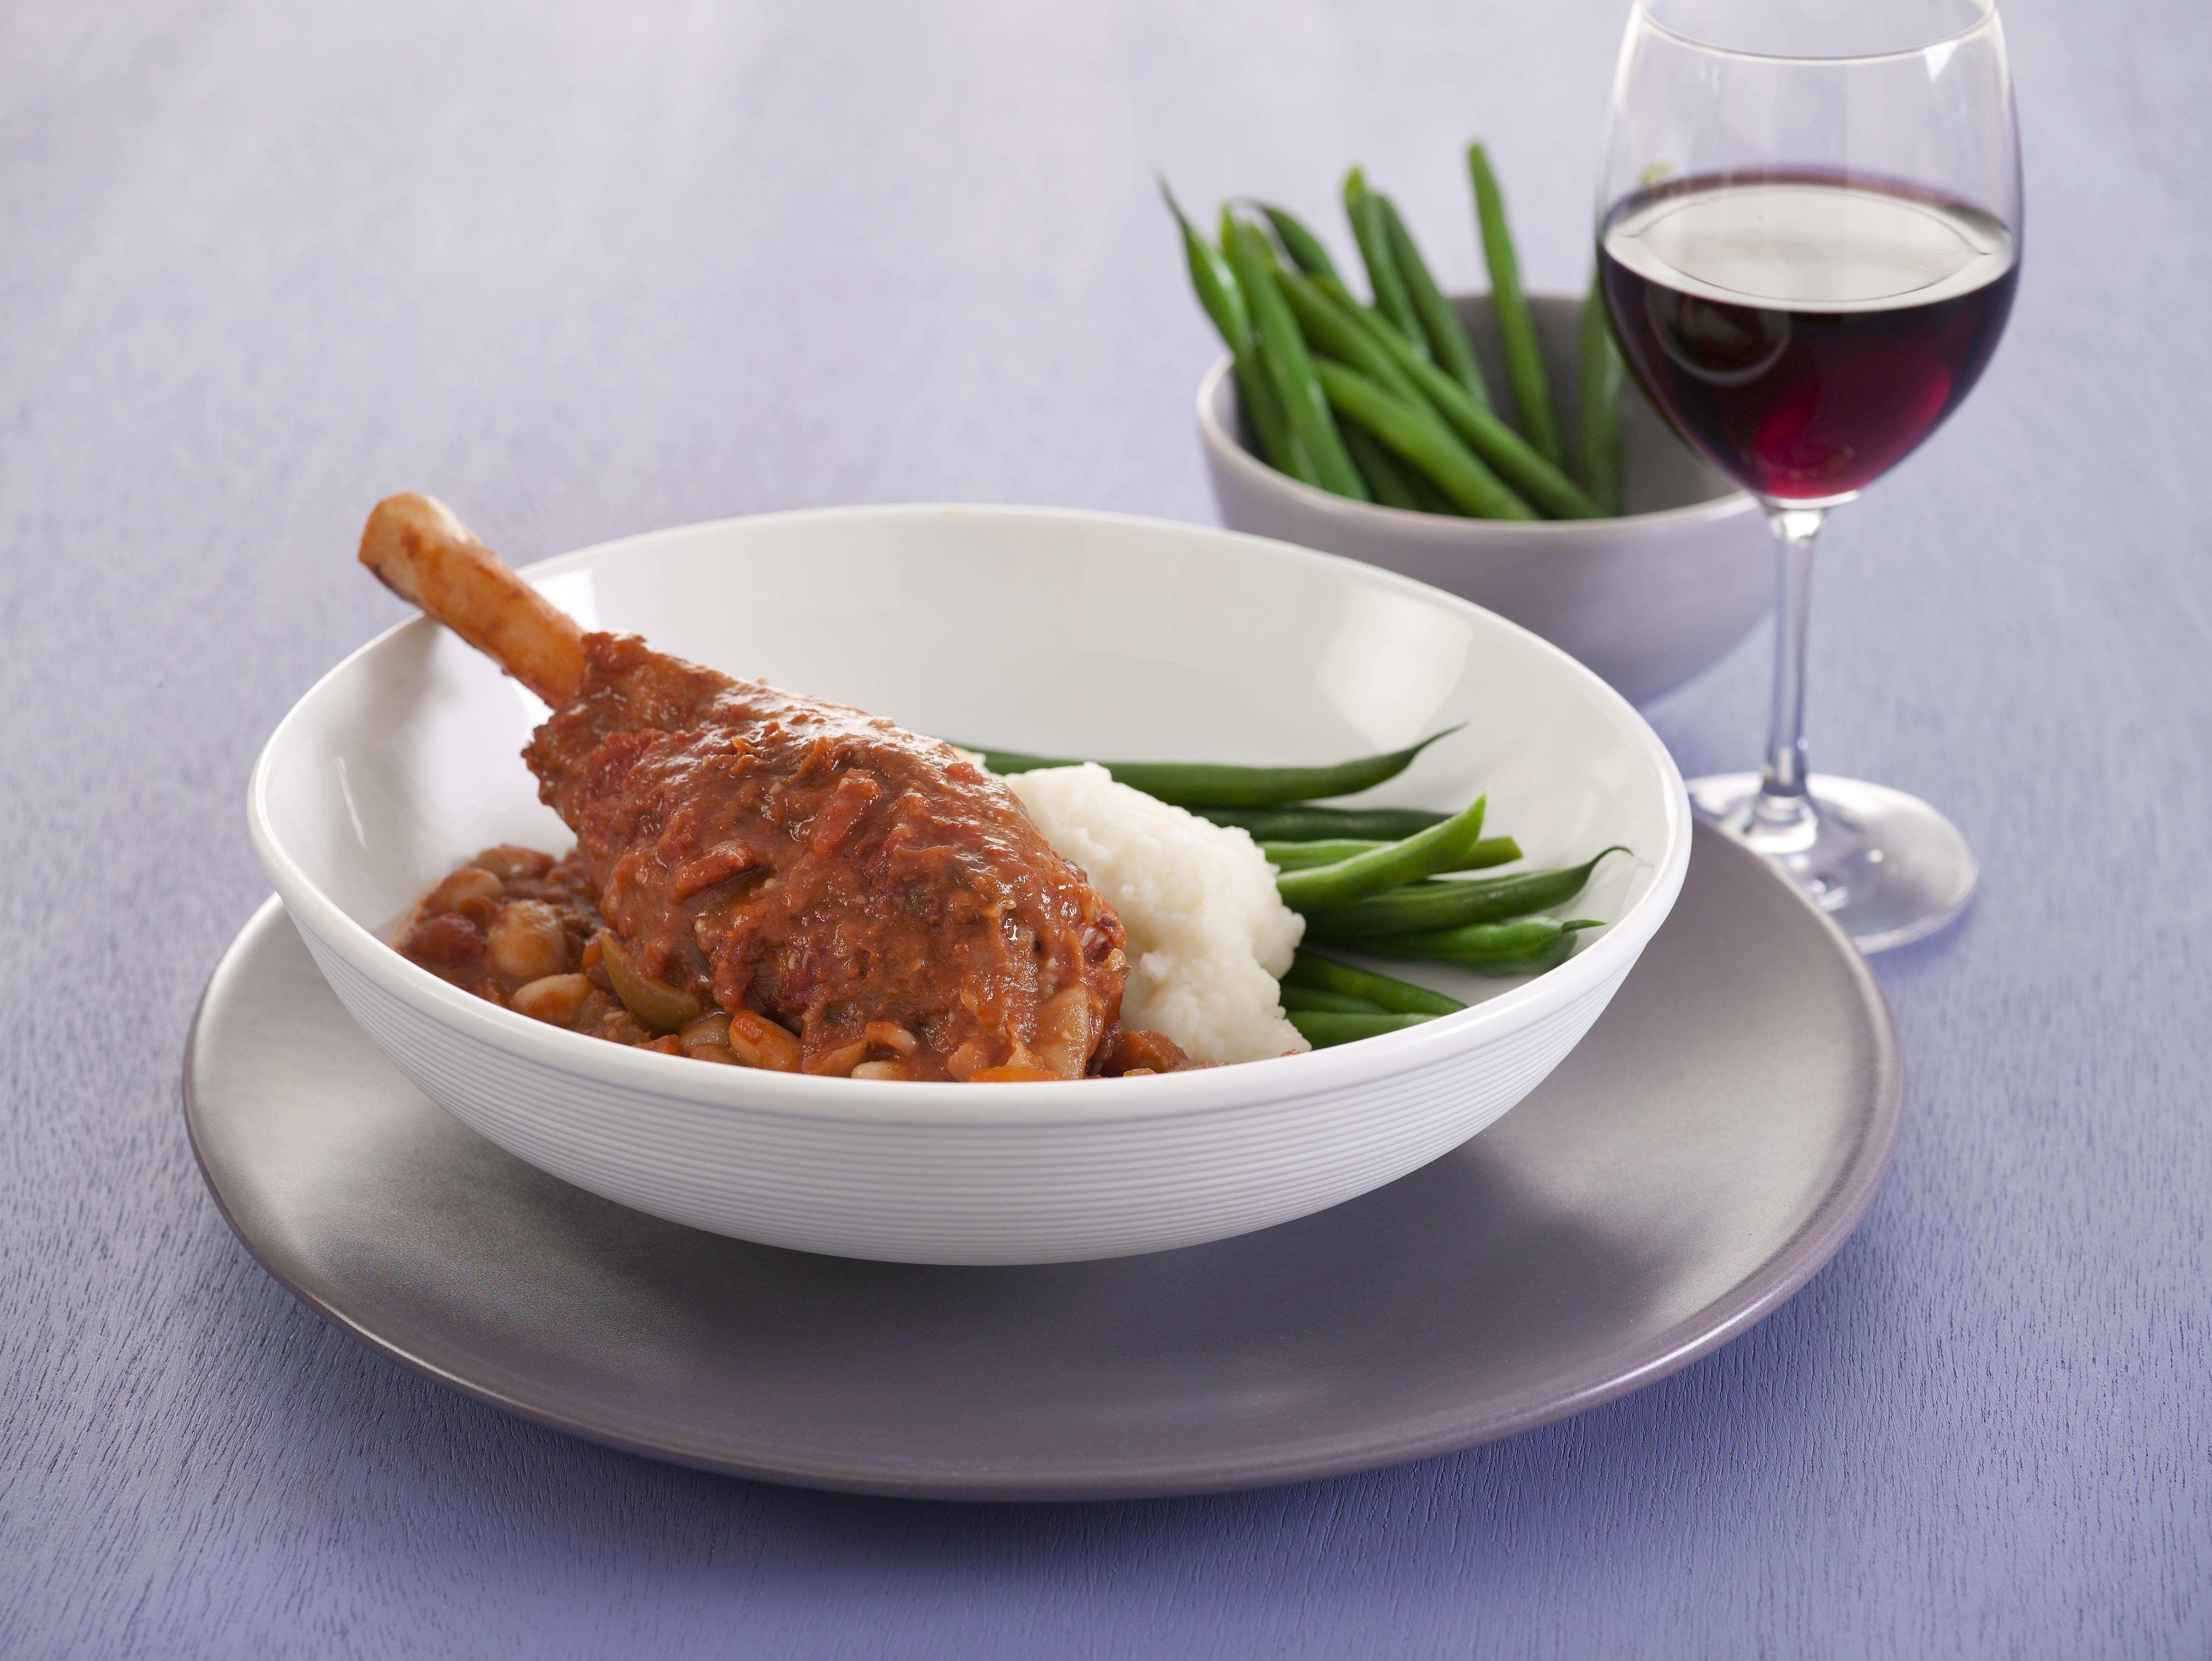 Lamb shanks with beans